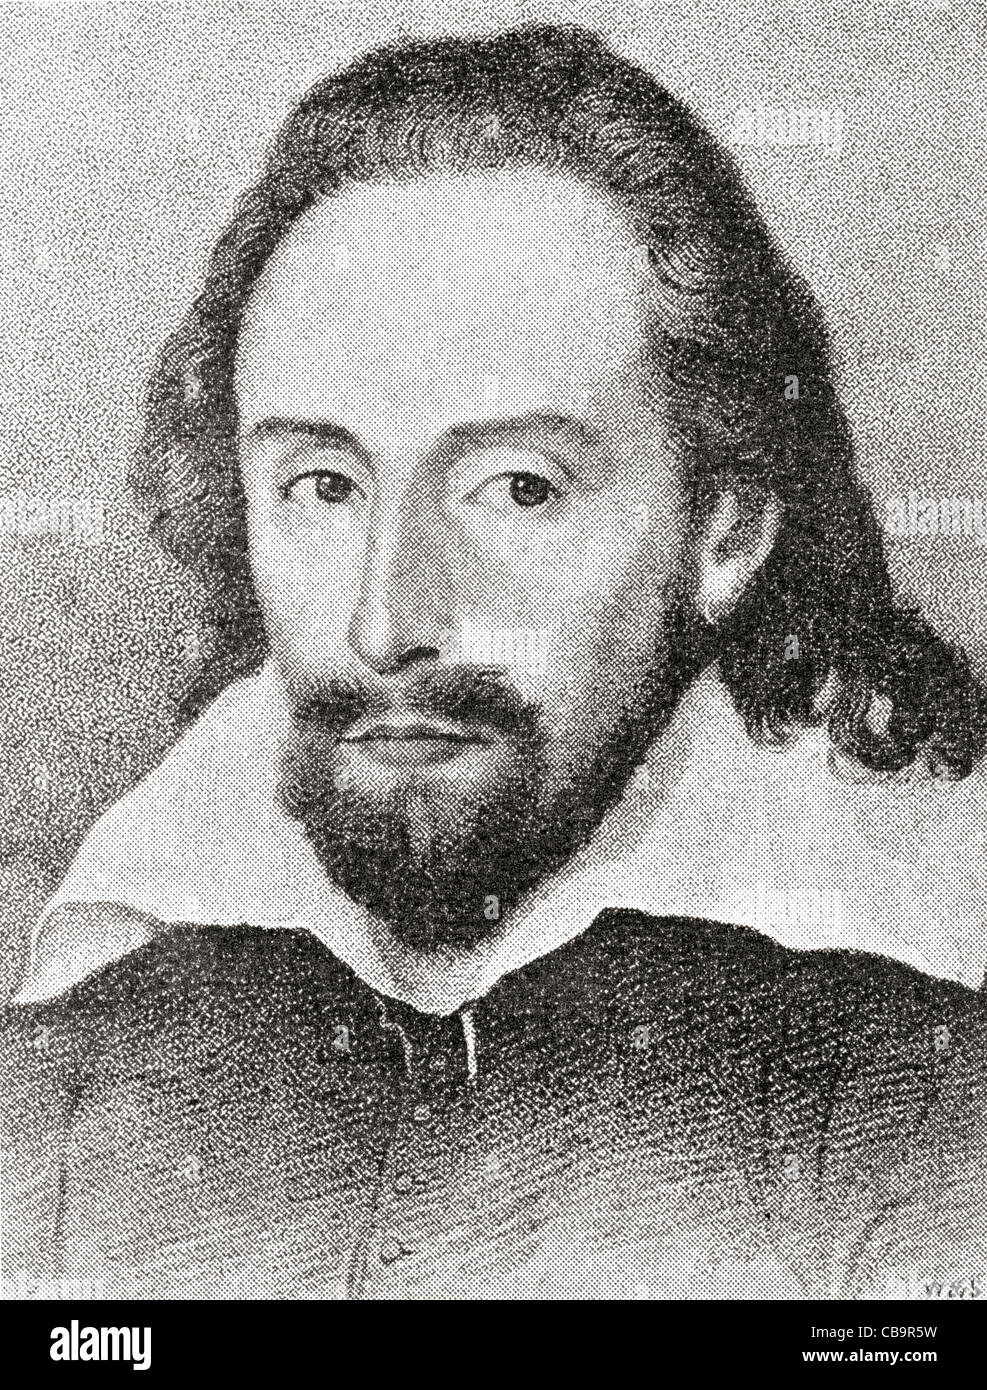 William Shakespeare, 1564 - 1616. English poet and playwright. This portrait is known as the Dunford Likeness. Stock Photo